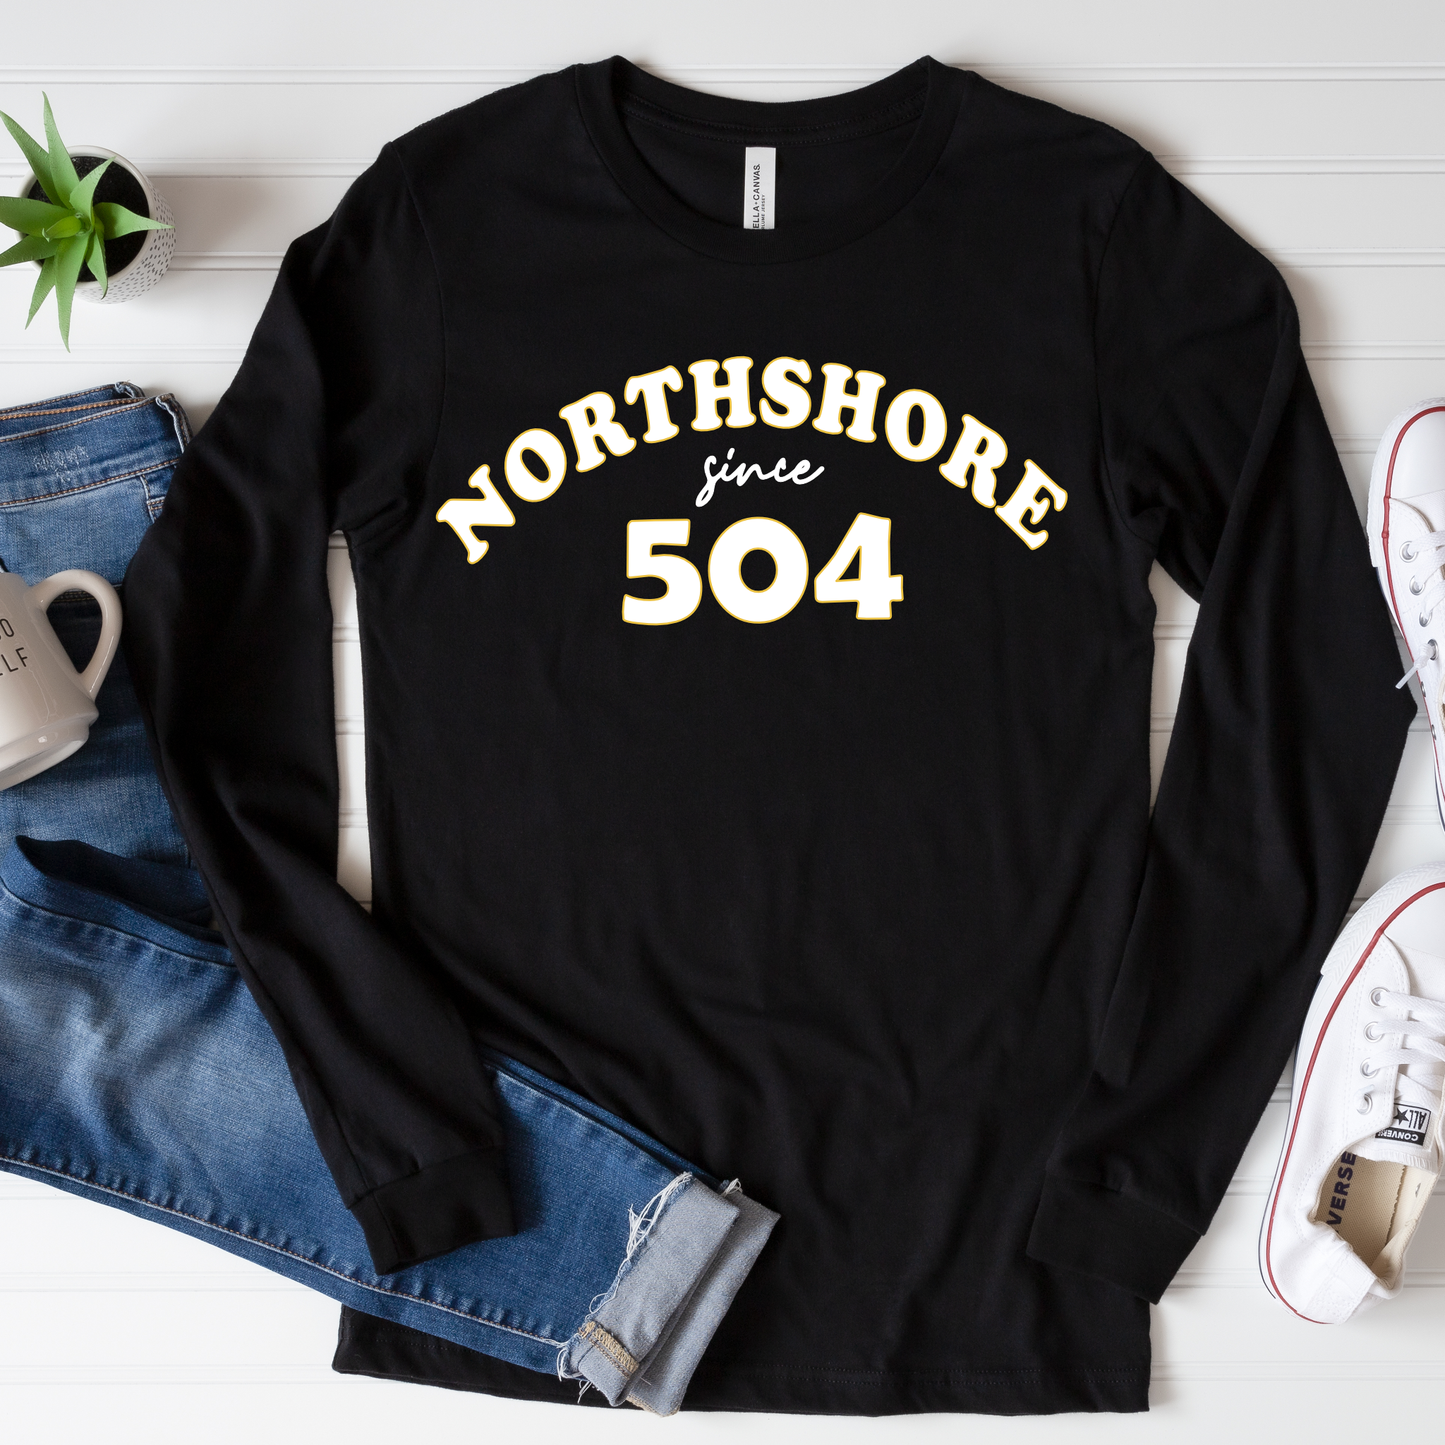 Northshore SINCE 504 - Short and Long Sleeve Tee